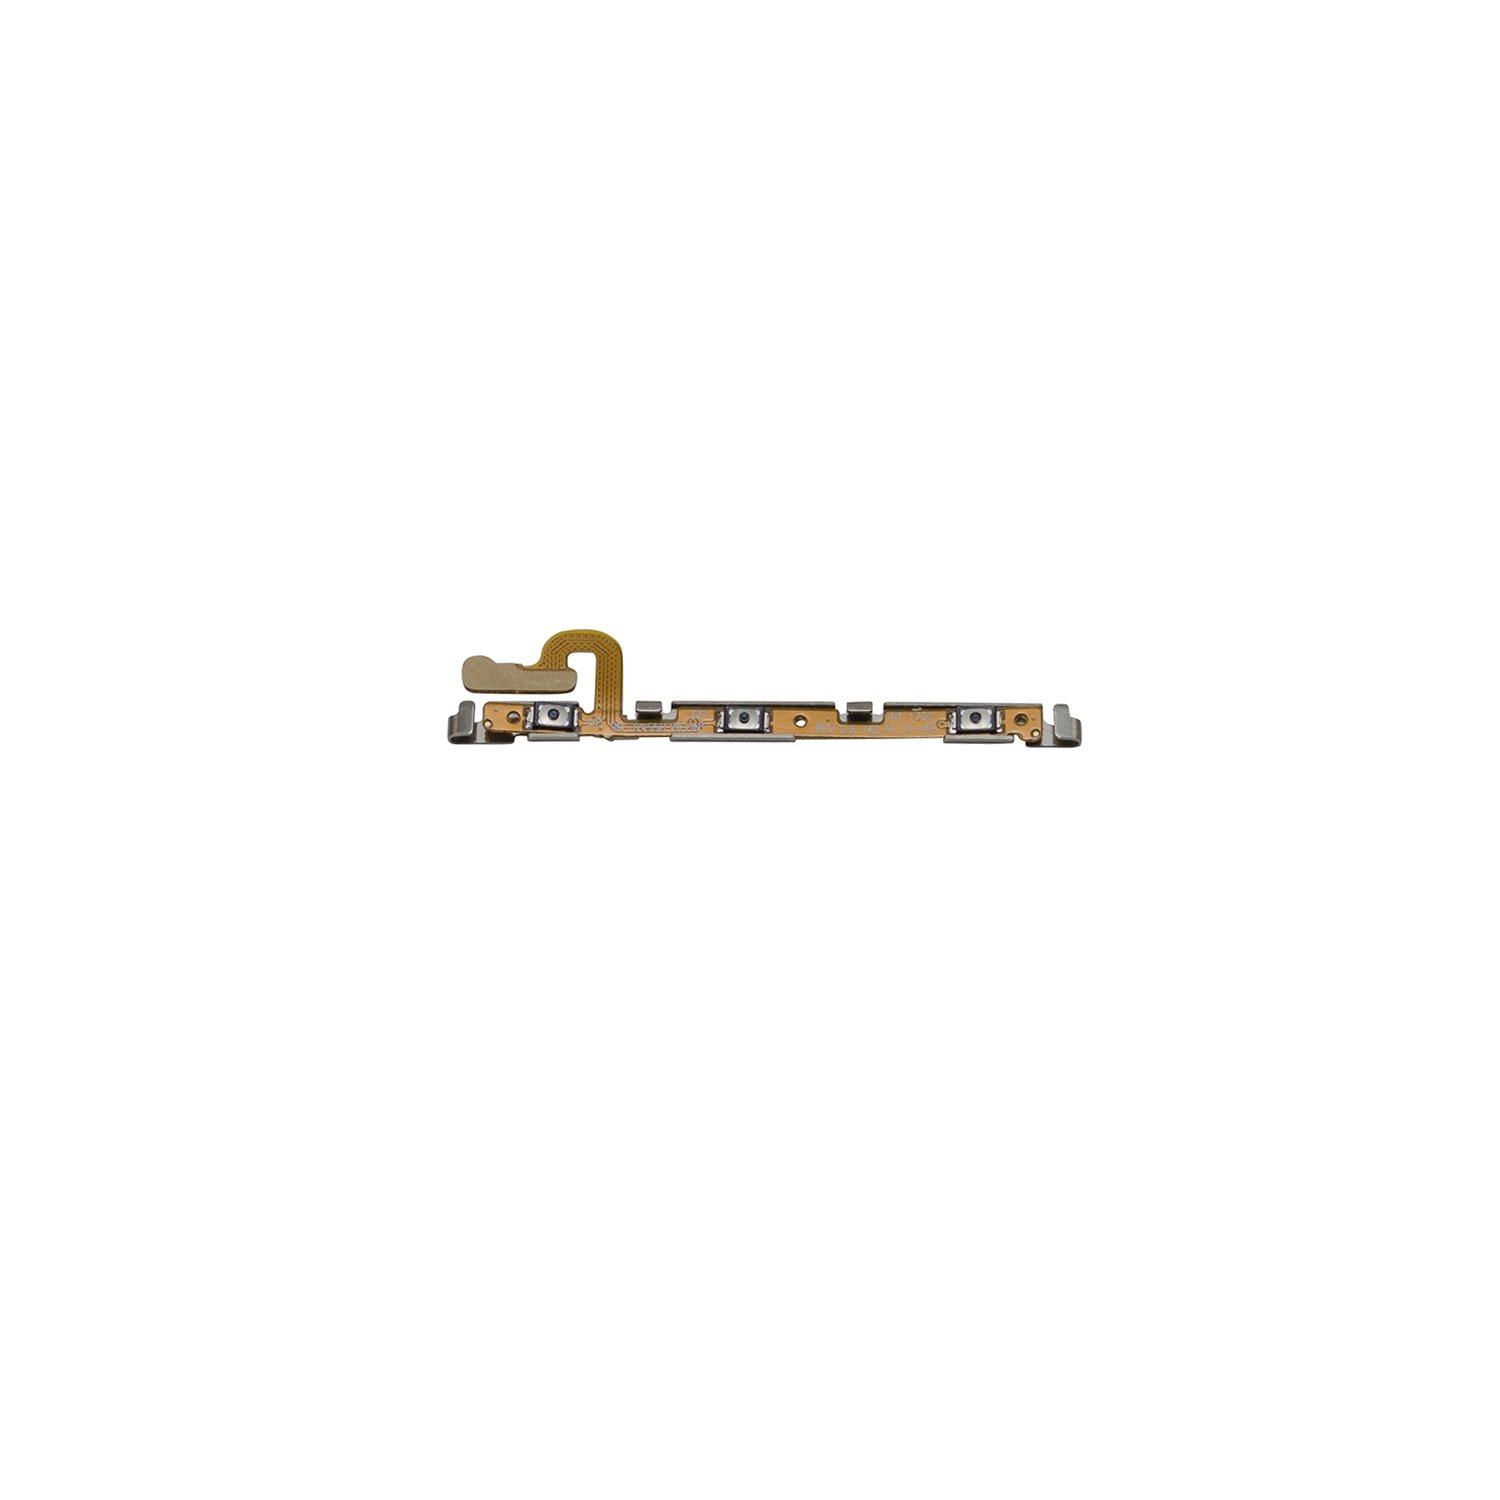 Replacement Volume Button On/Off Flex Cable For Samsung Galaxy A8+ Plus / A8 (A530/2018) / S8 / S8+ Plus / Note 8